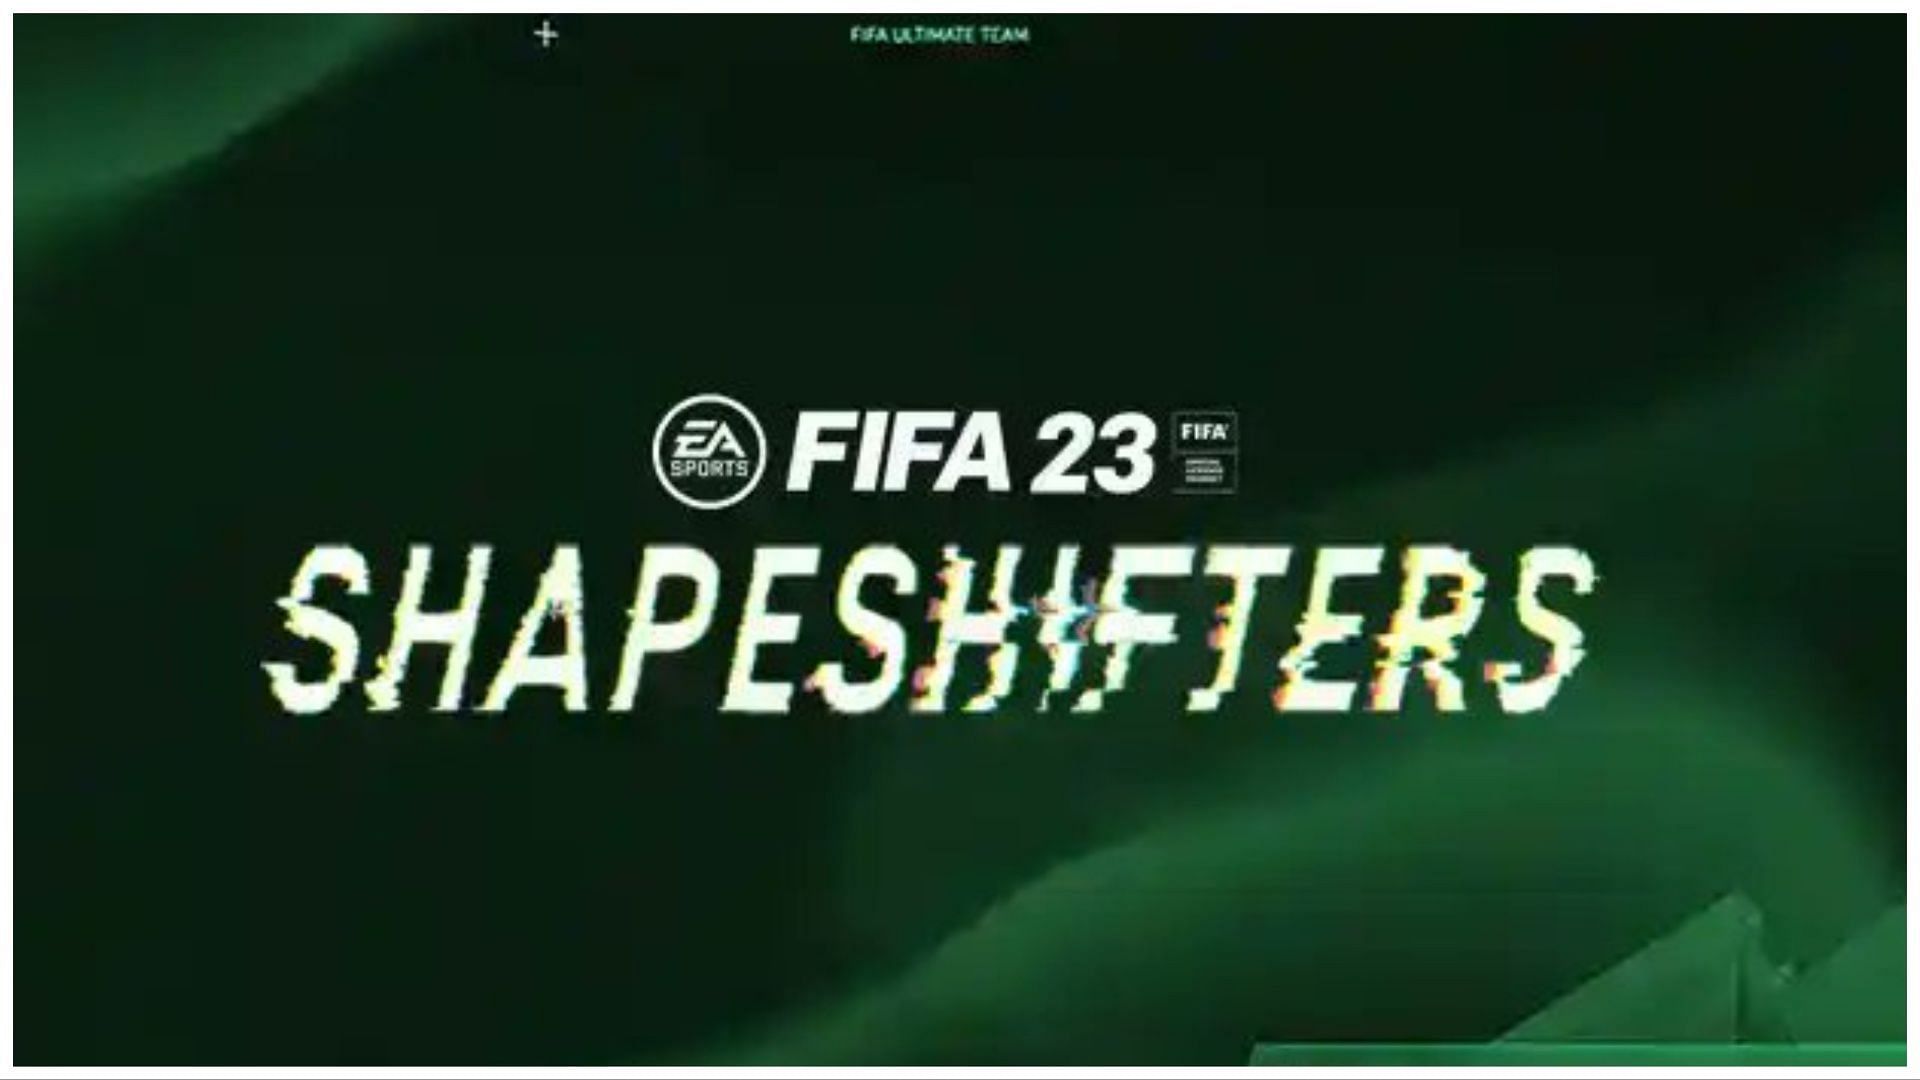 Shapeshifters is rumored to arrive in FIFA 23 (Image via Twitter/FIFAUTeam)